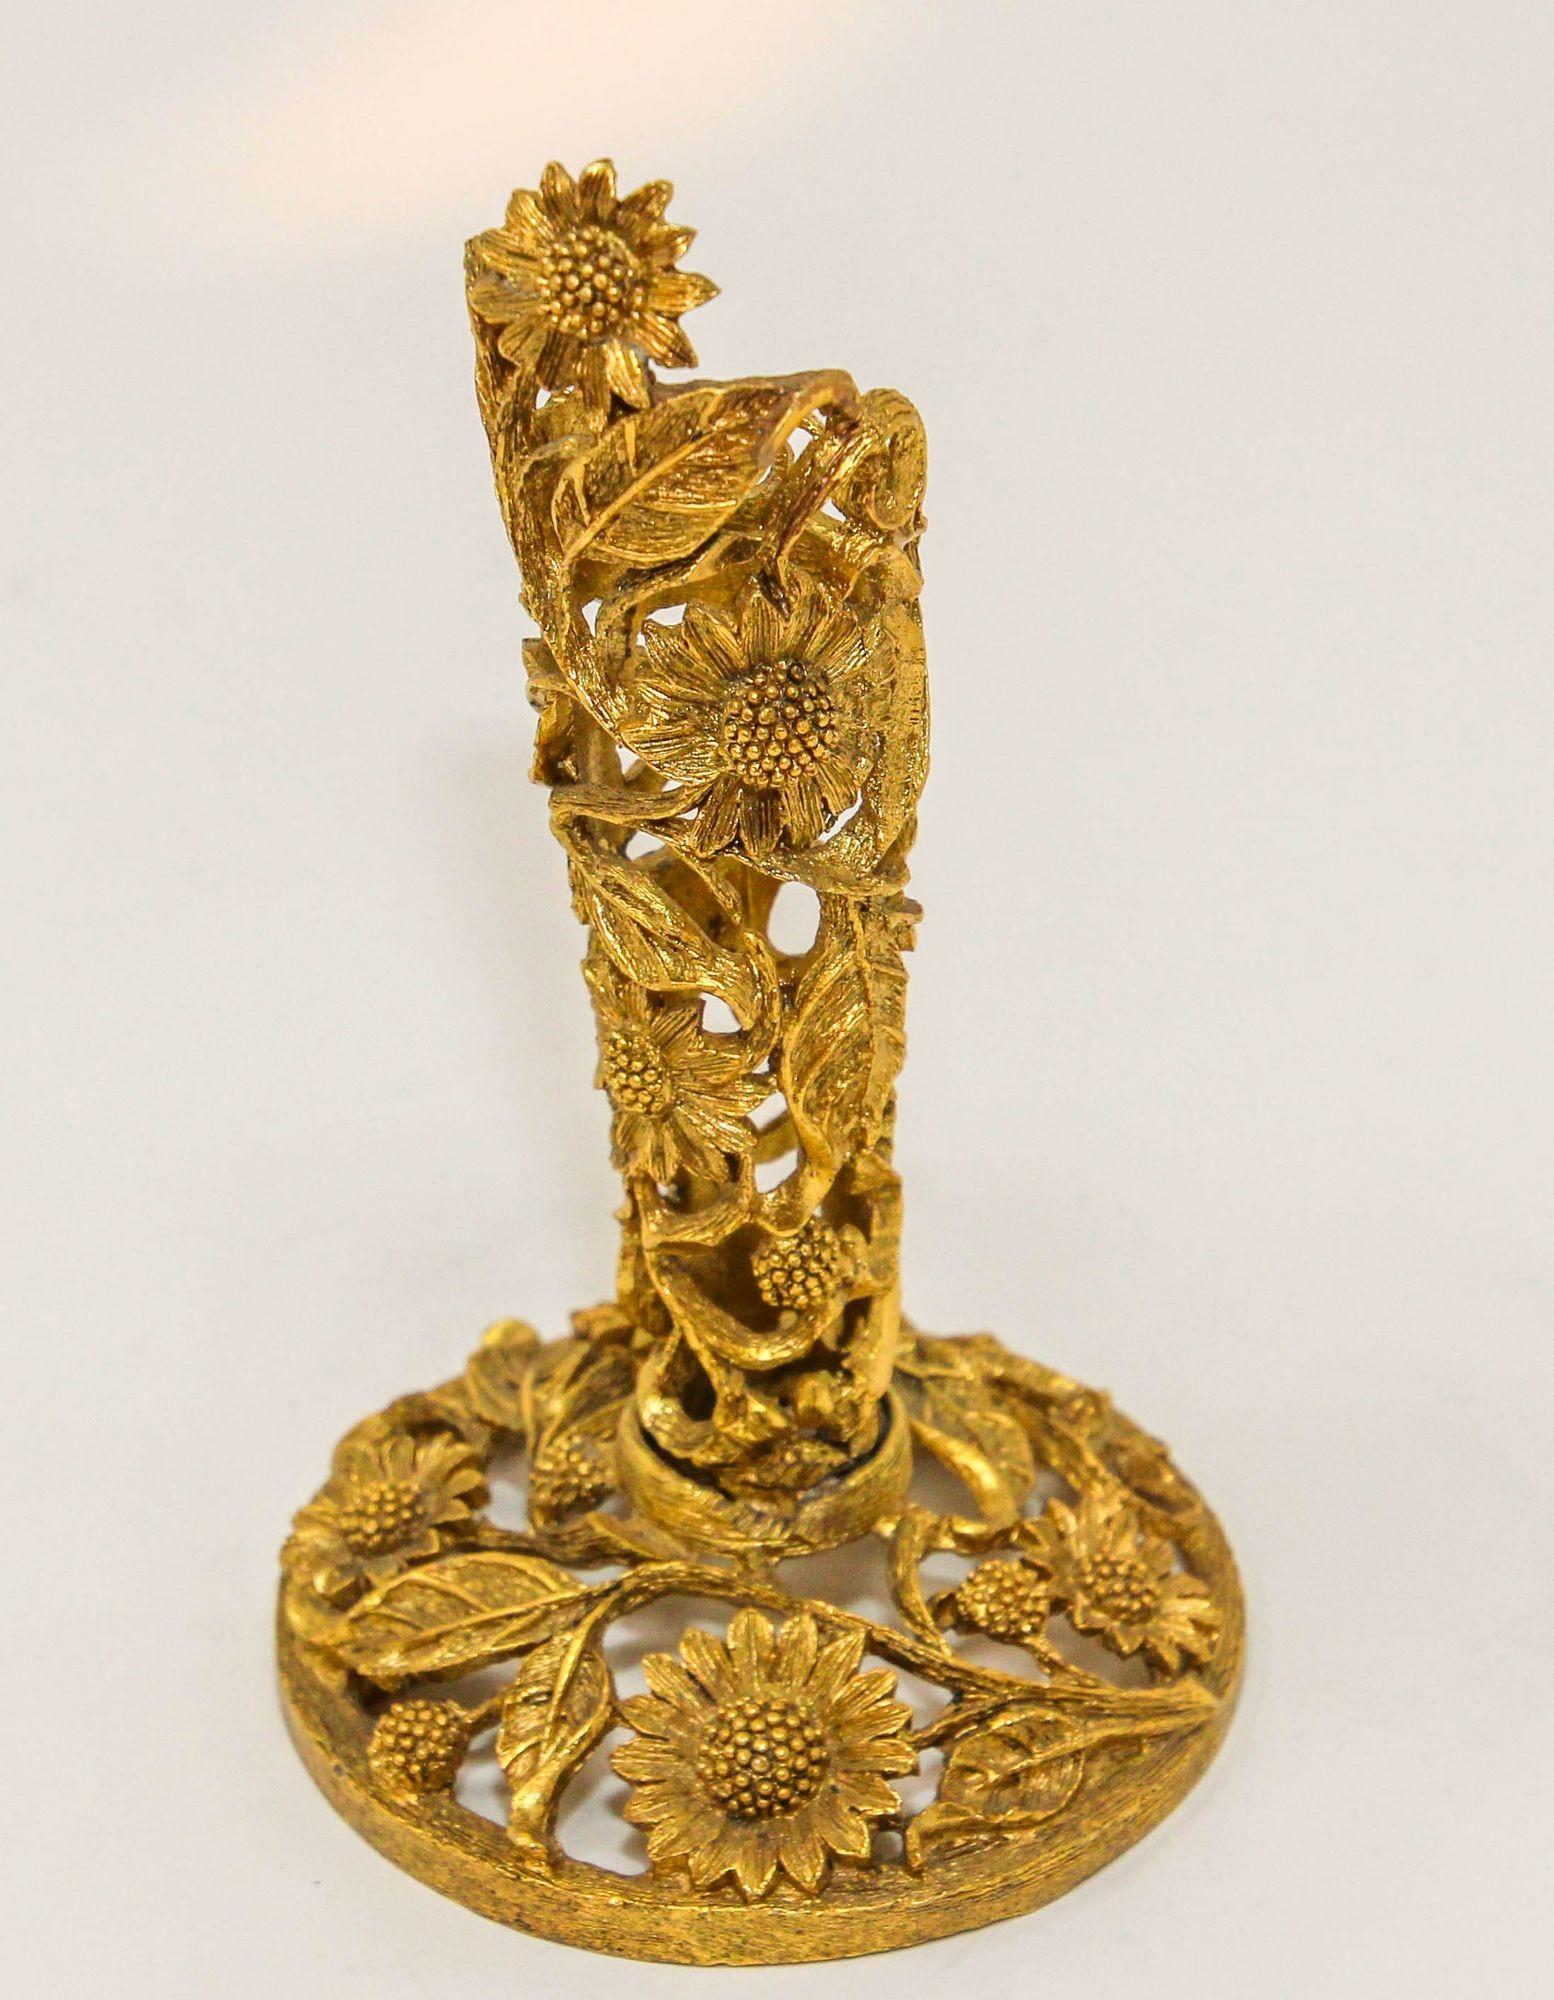 Vintage Matson Ormolu Gold Tone Metal Filigree Bud Vase Holder 1940s In Good Condition For Sale In North Hollywood, CA